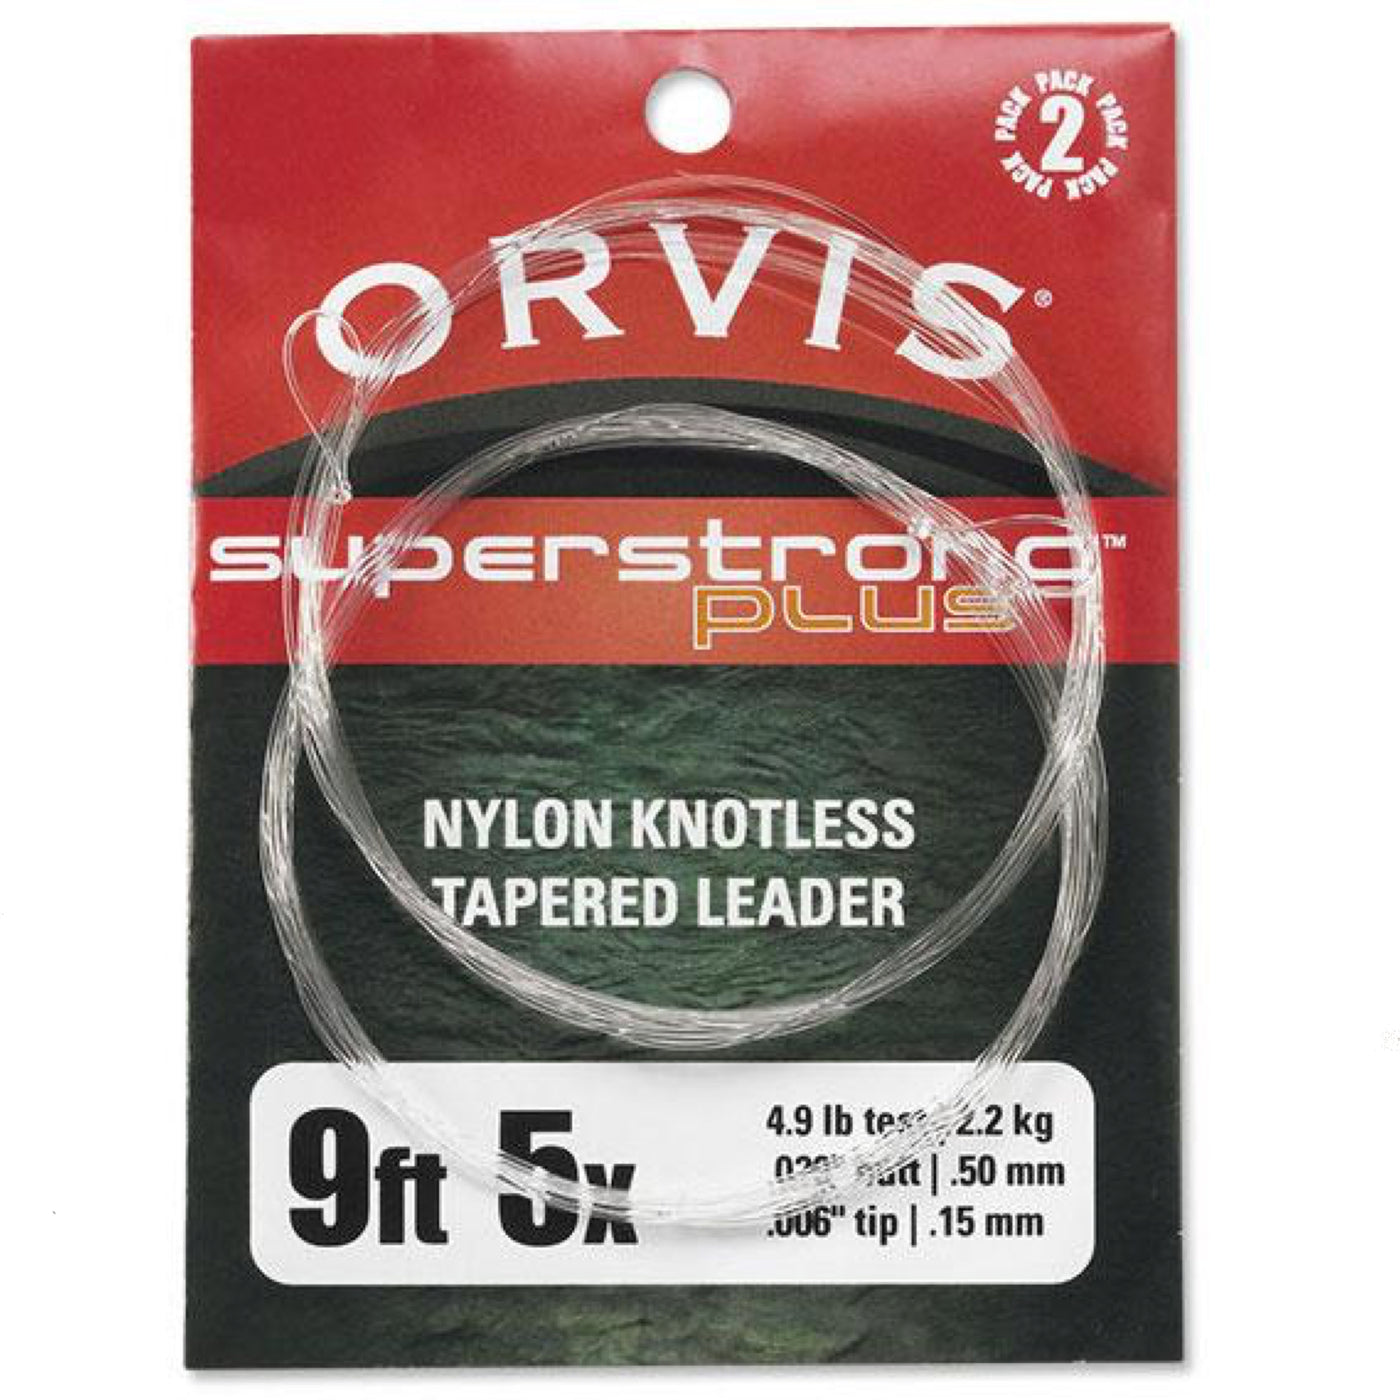 Orvis SuperStrong Plus Tapered Fly Fishing Leader 2PK (9 foot